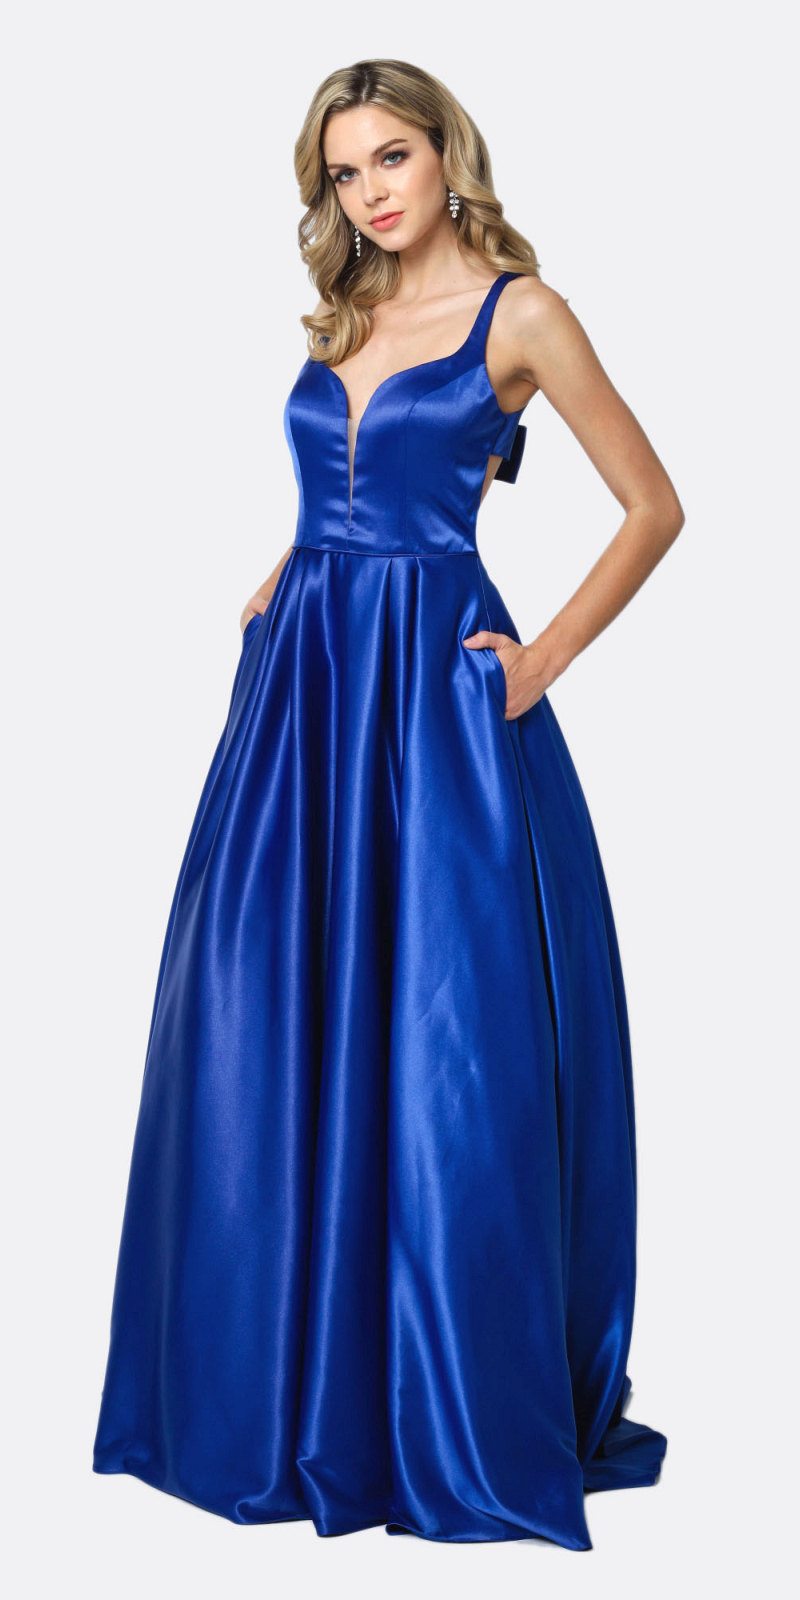 Long Prom Dress Cut-Out Back with Bow Royal Blue